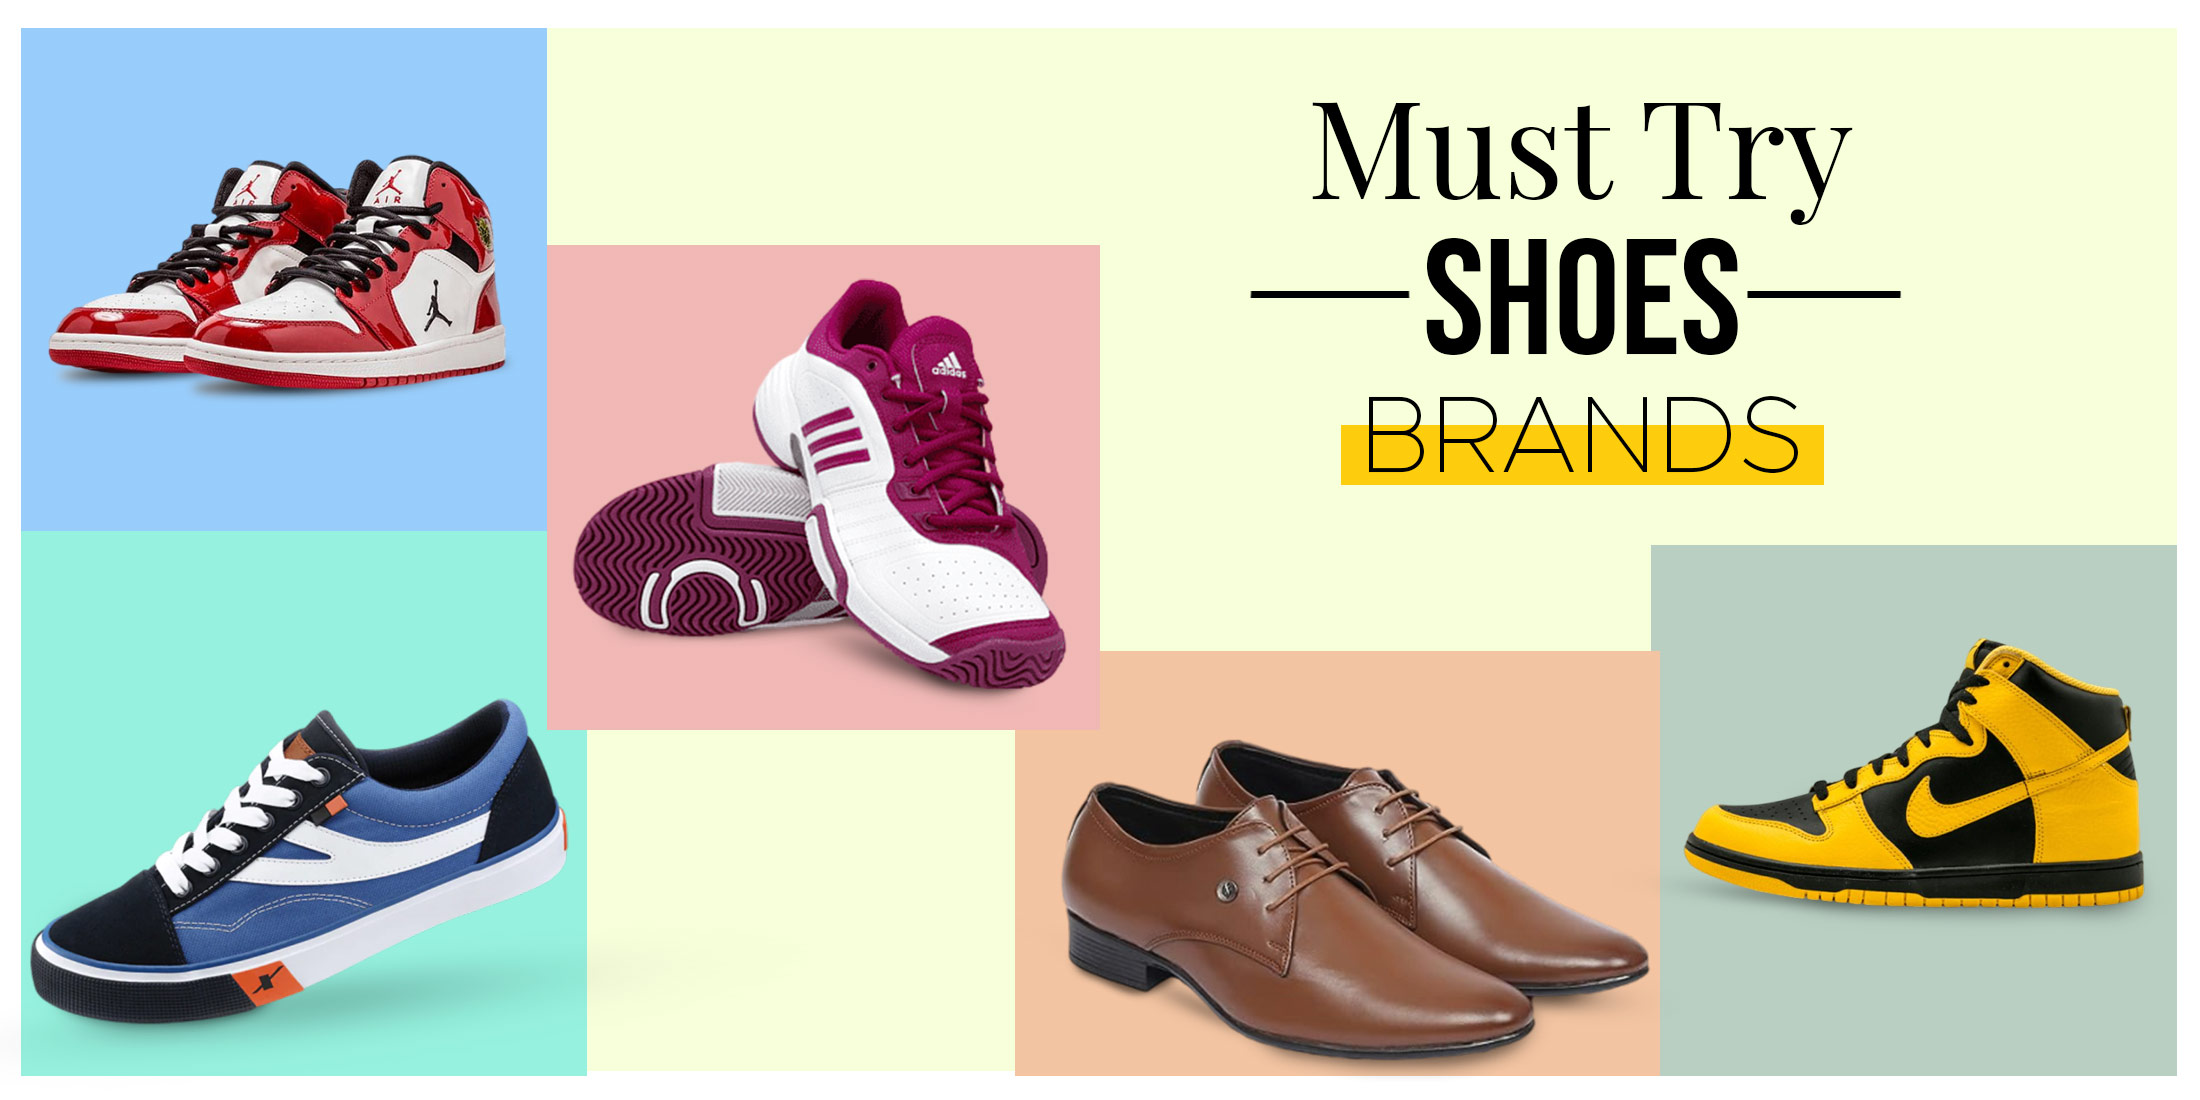 Top 10 Indian Shoe Brands That You Need To Know